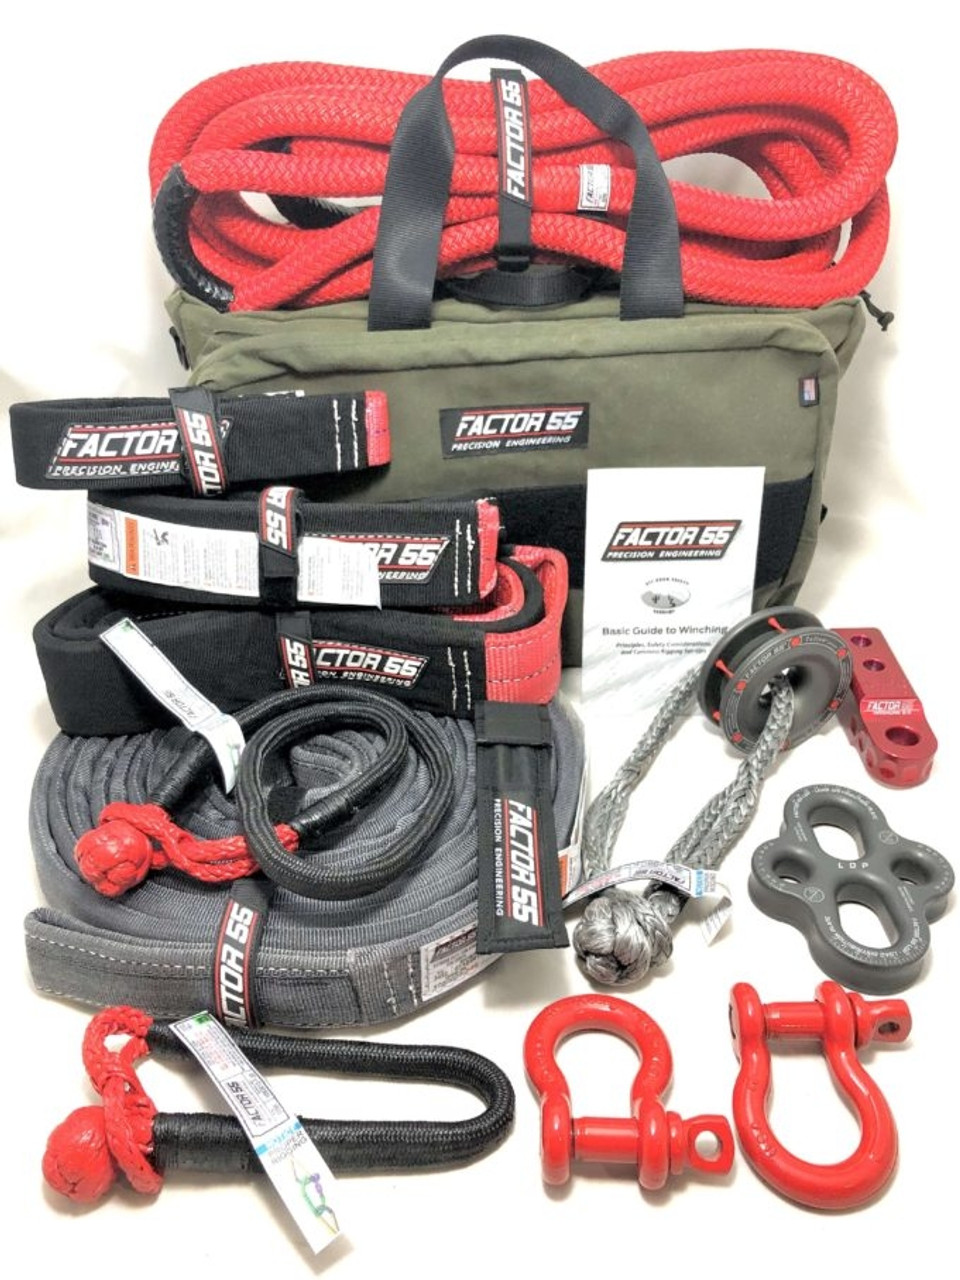 Winch & Recovery Gear - Quality Winch & Recovery Equipment